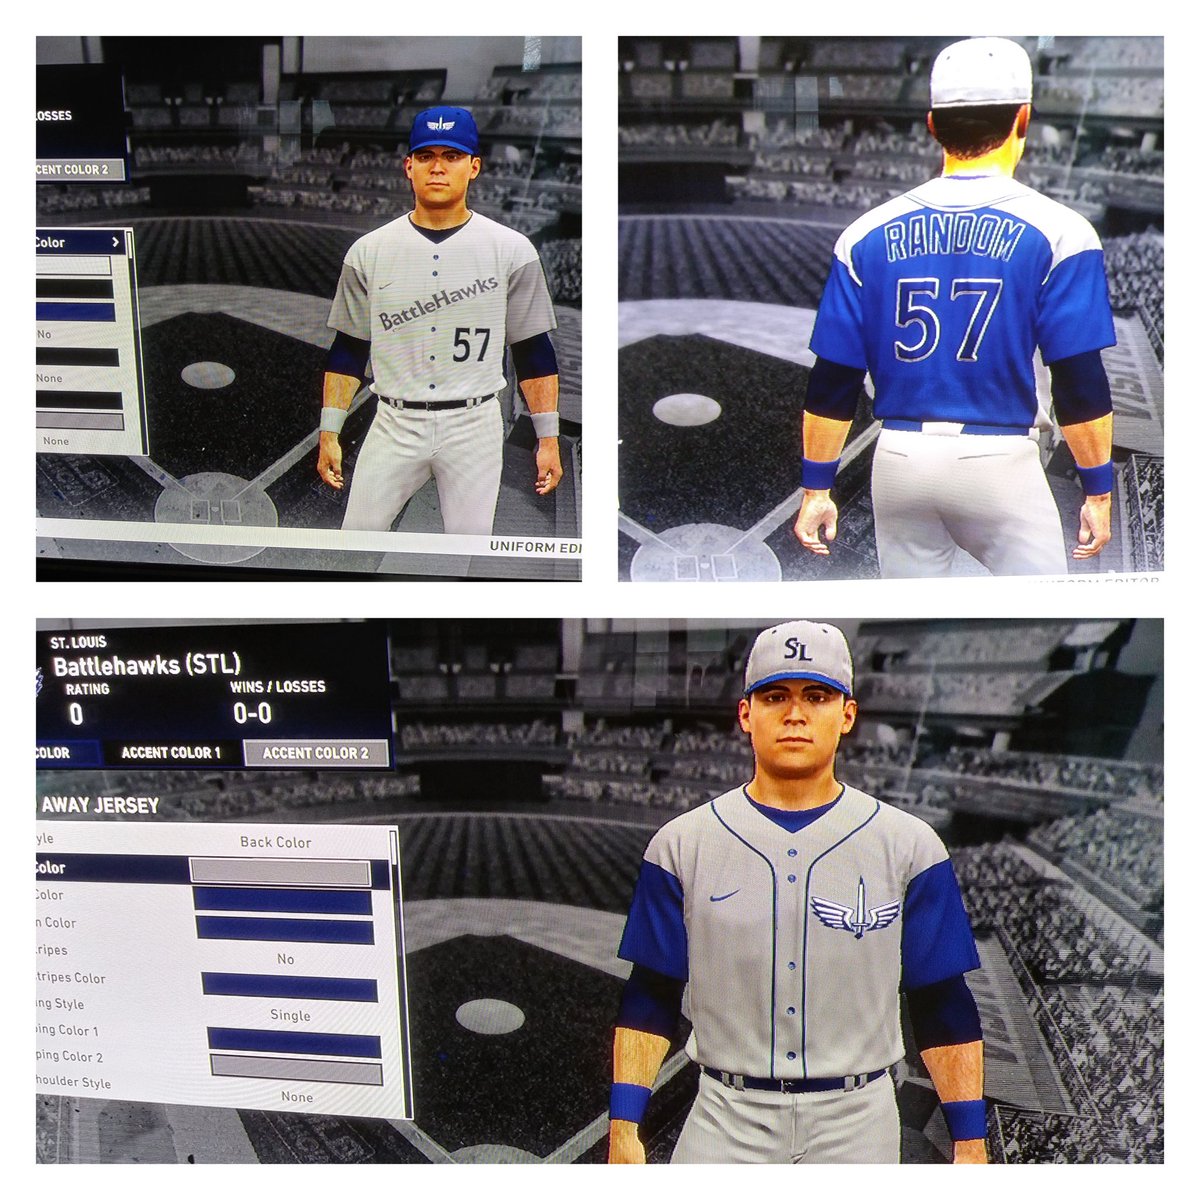 Home and away jersey for your St. Louis Battlehawks Baseball Club. Home field? Sportsman's Park. AL East. I relocated the Tampa Bay Rays to St. Louis. #theshow20